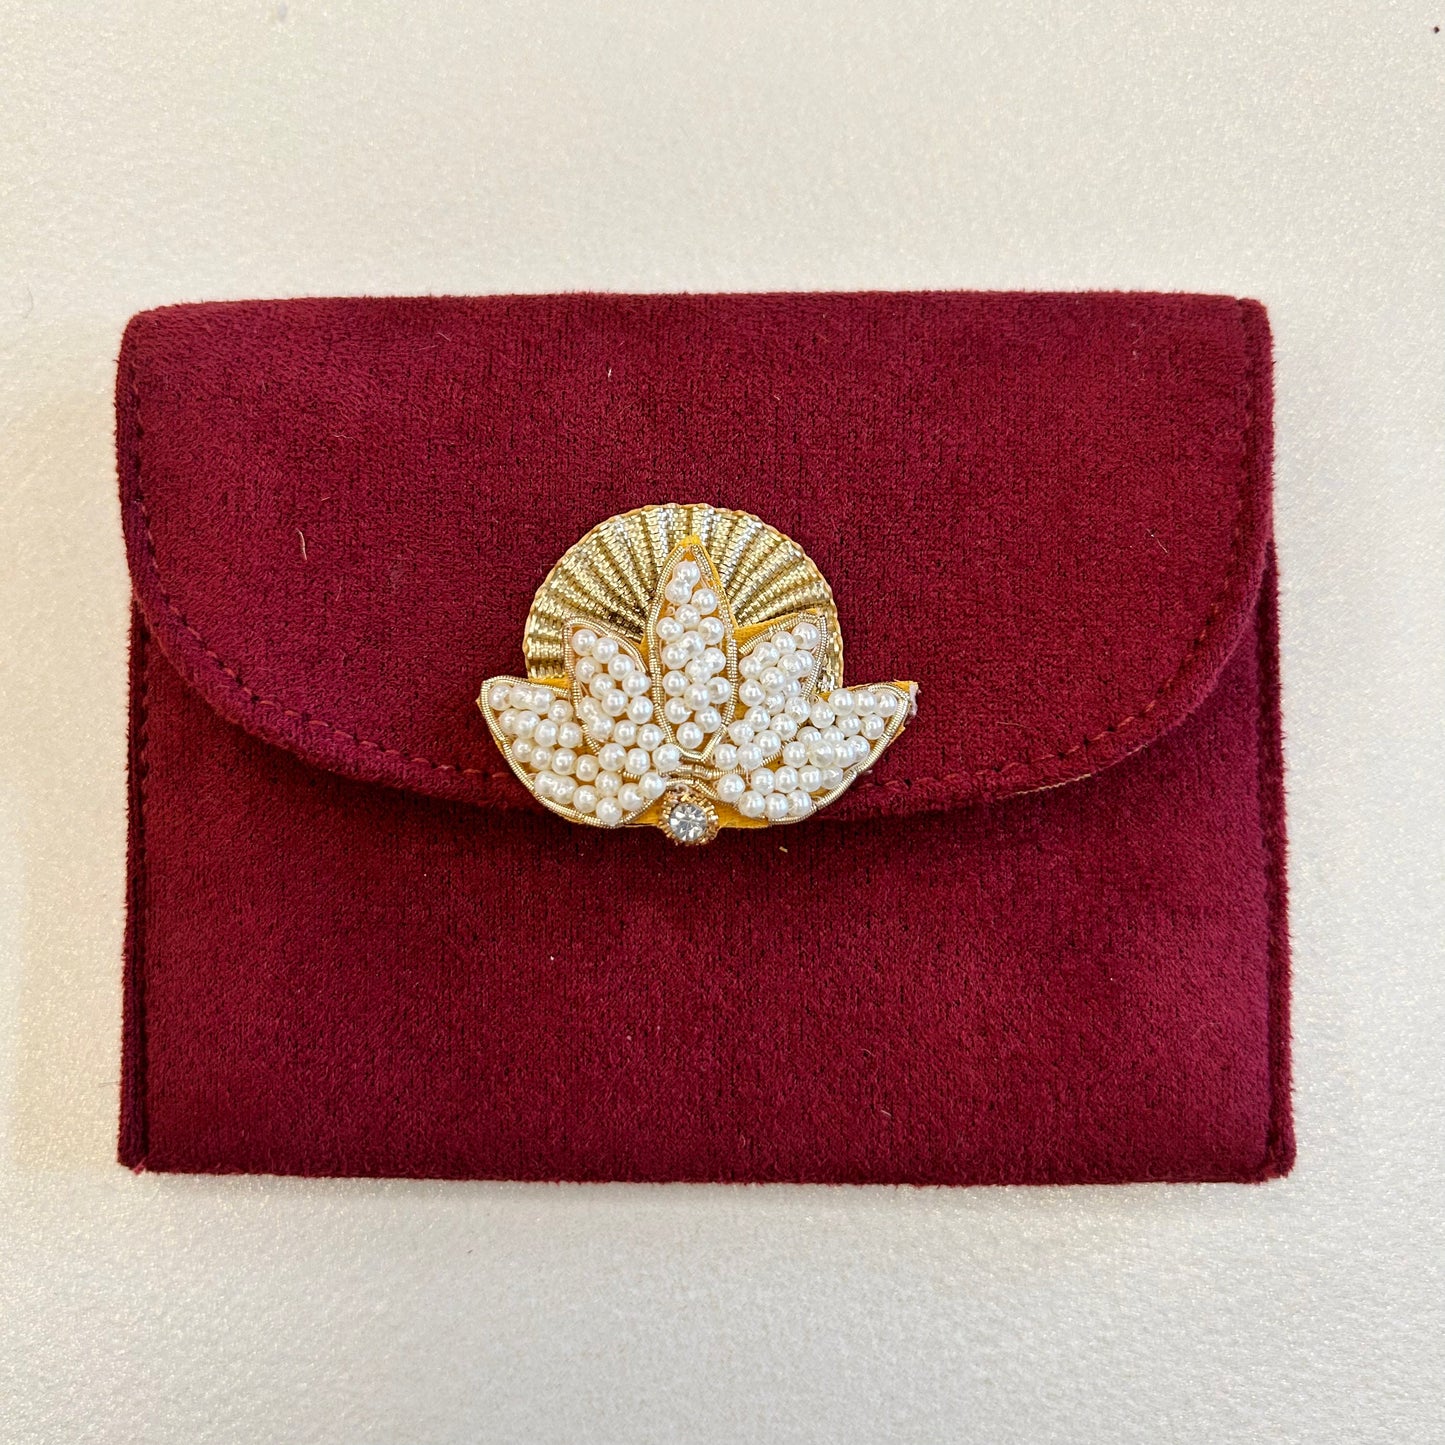 Suede with Lotus flower Envelope - Small